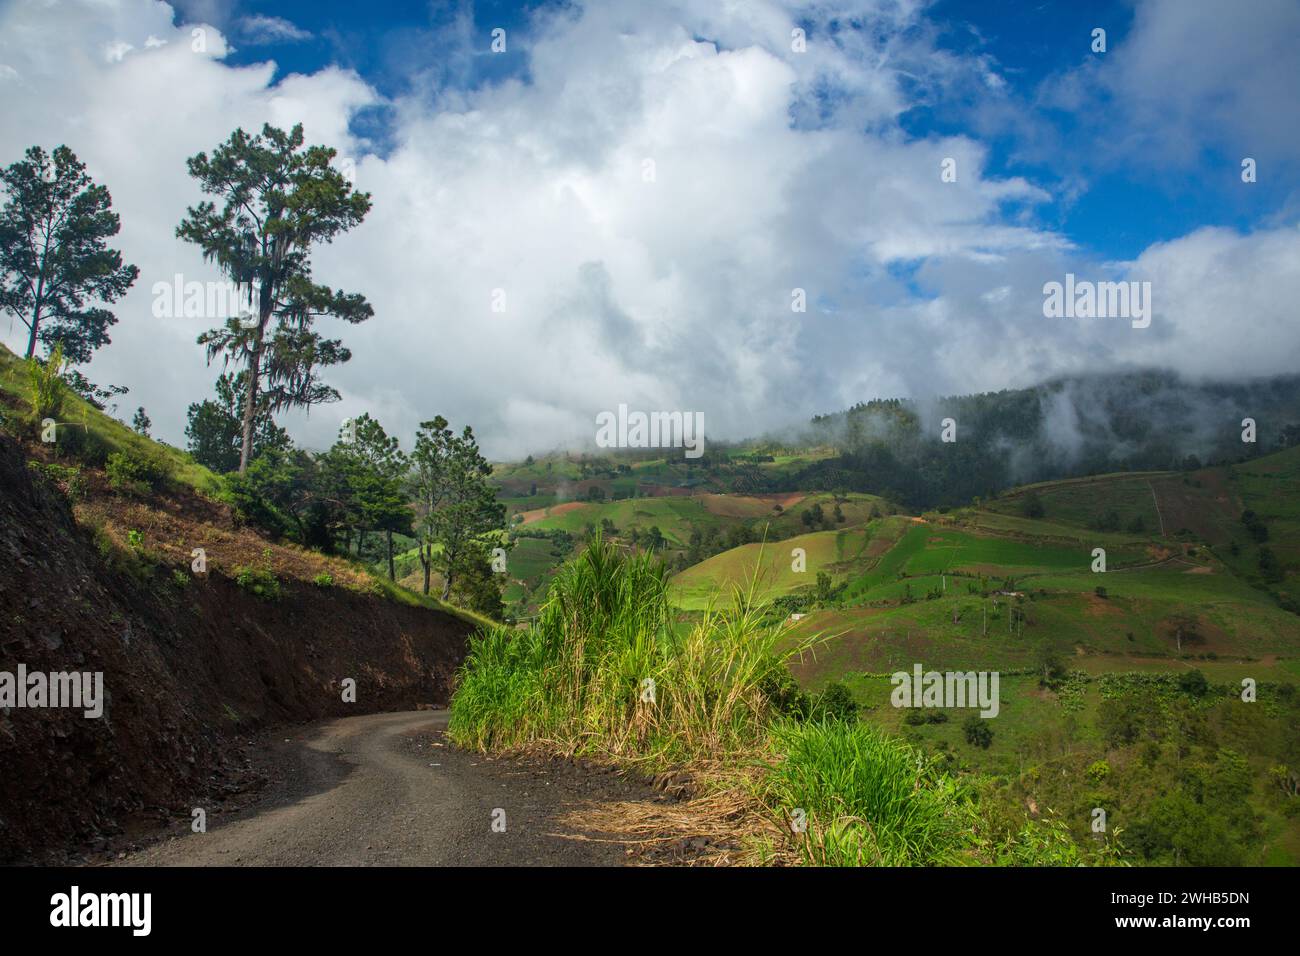 Low clouds over farms in the hills near Constanza in the Dominican Republic.  Large Hispanola pine trees are at left. Stock Photo